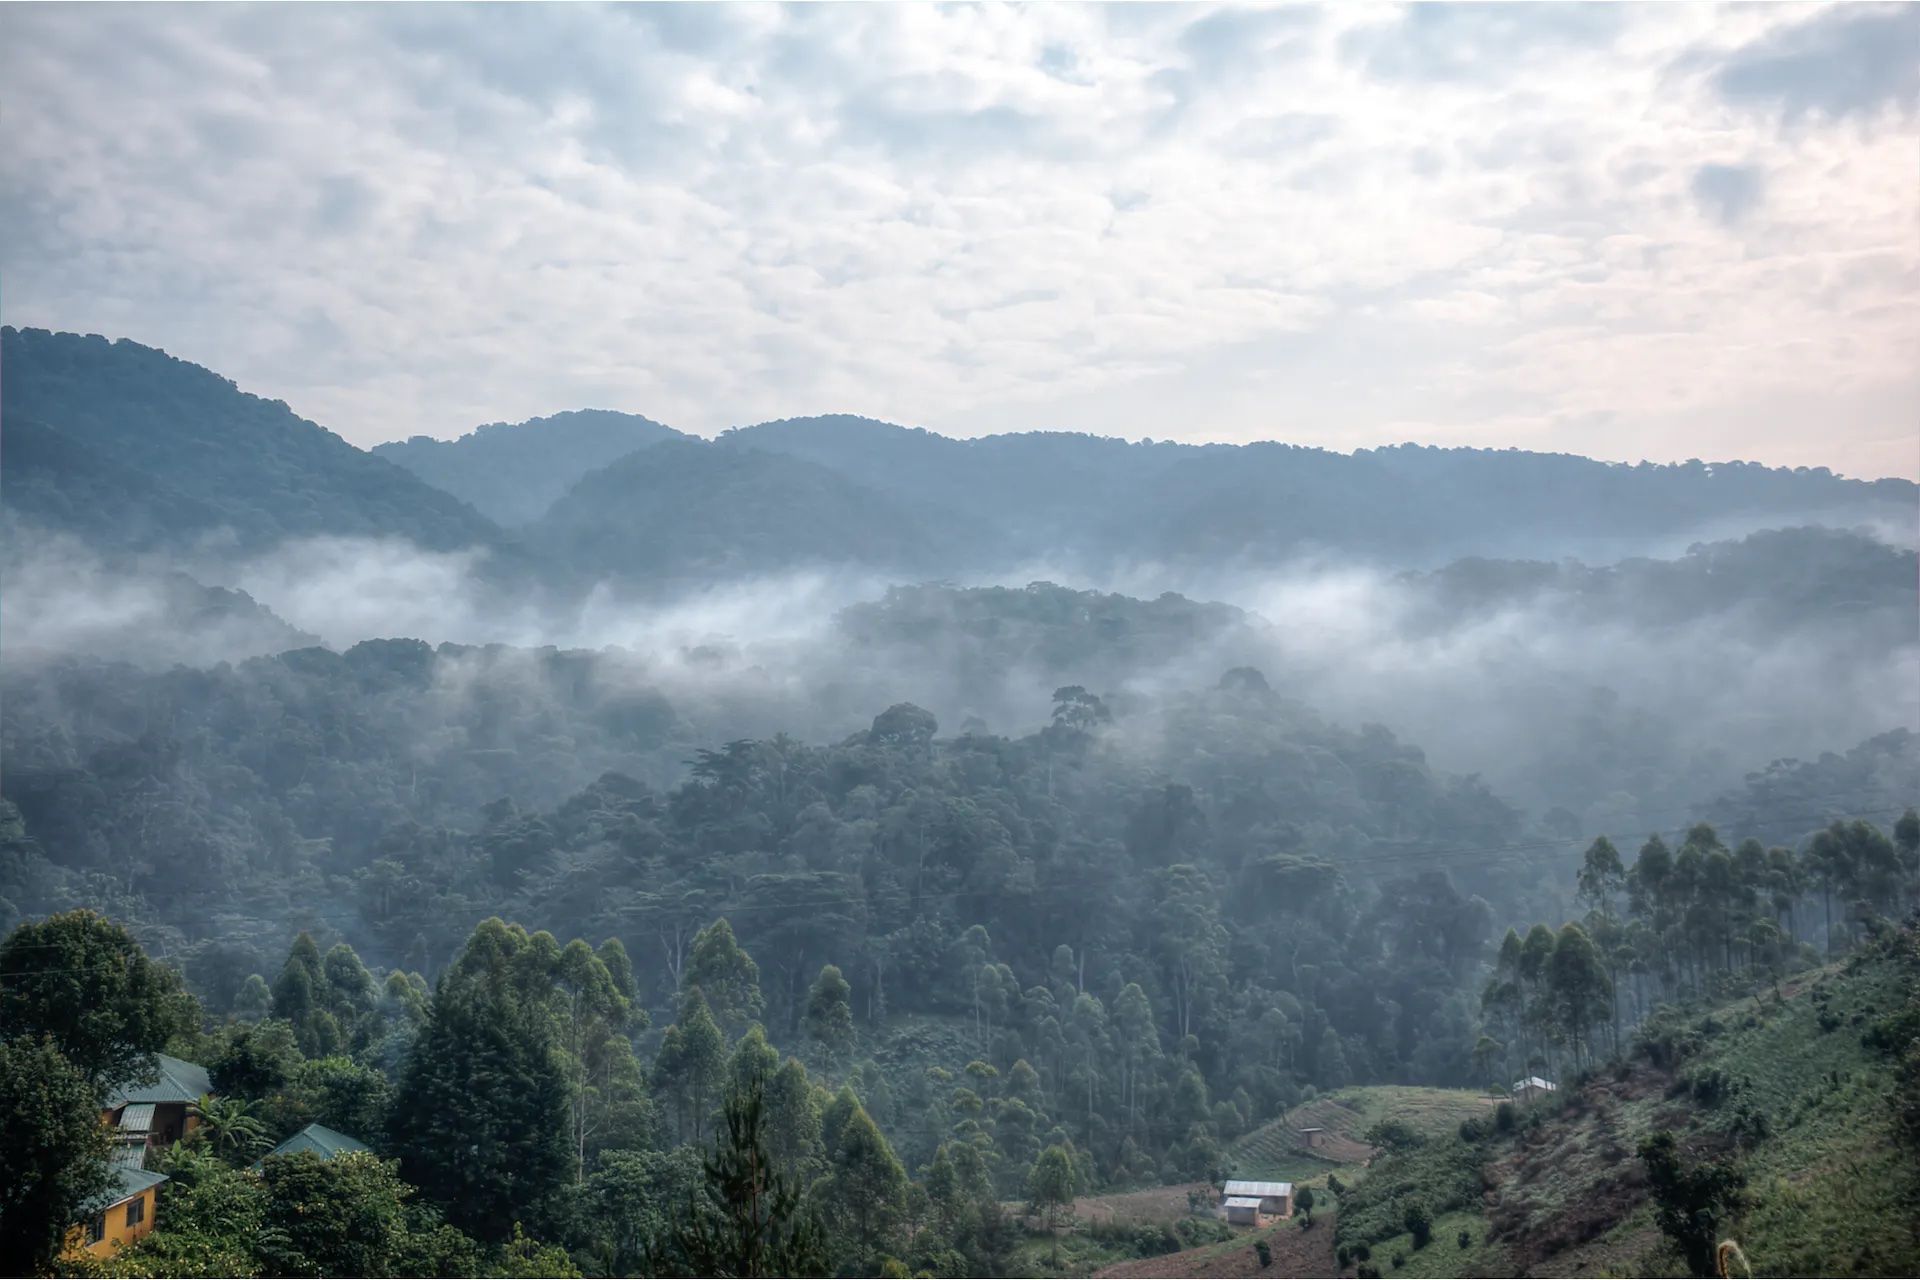 View from a community-run lodge in Bwindi Impenetrable Forest. Mbogo Africa Safaris